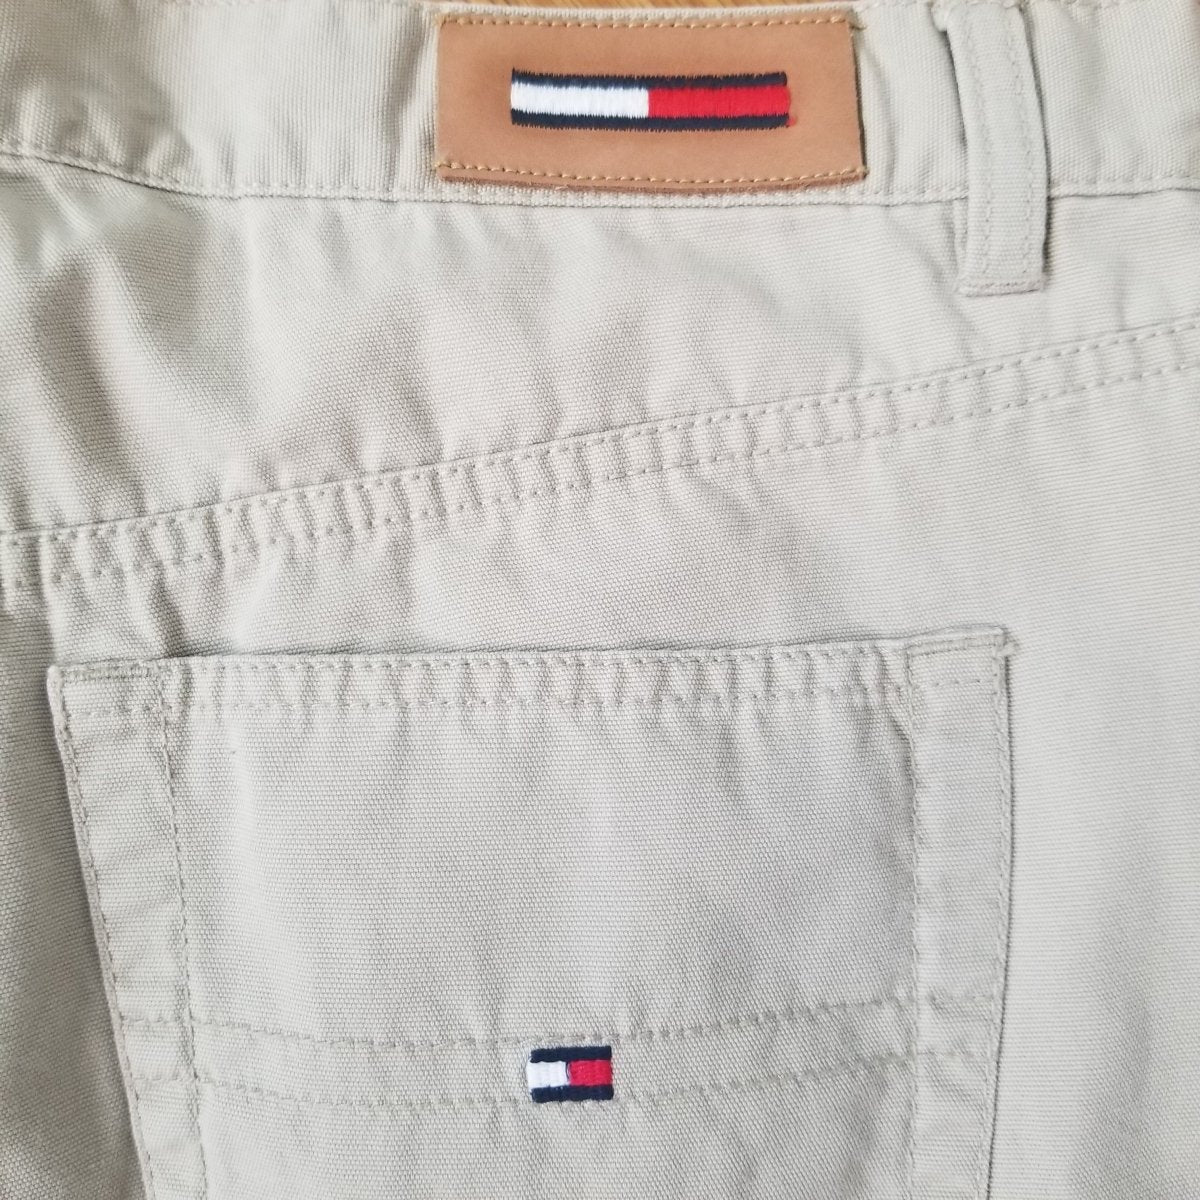 Y2K Cropped Tommy Khaki Pants Women 14 Waist 36 - themallvintage The Mall Vintage